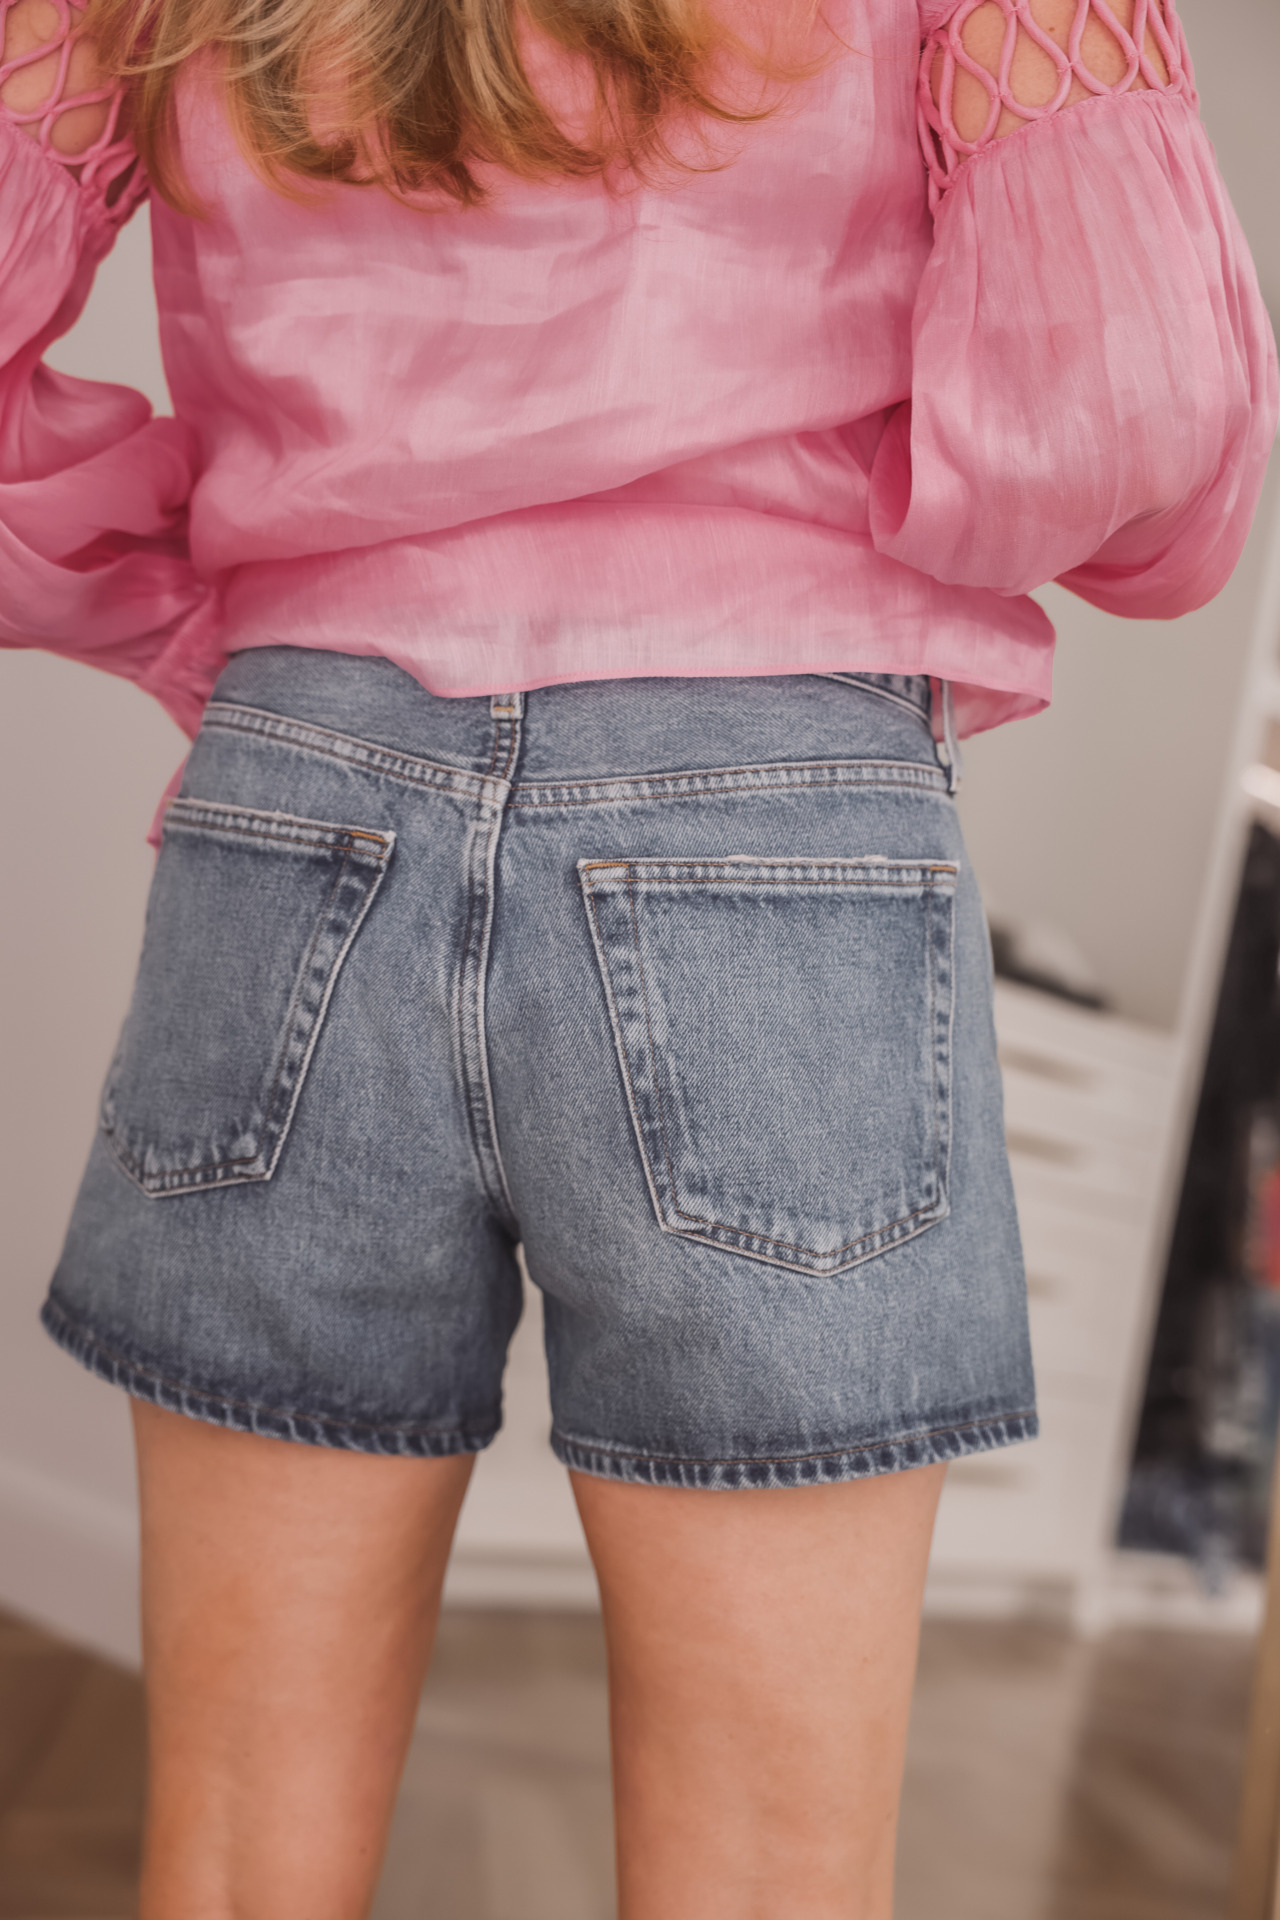 how to wear shorts over 40, Favorite denim shorts over 40